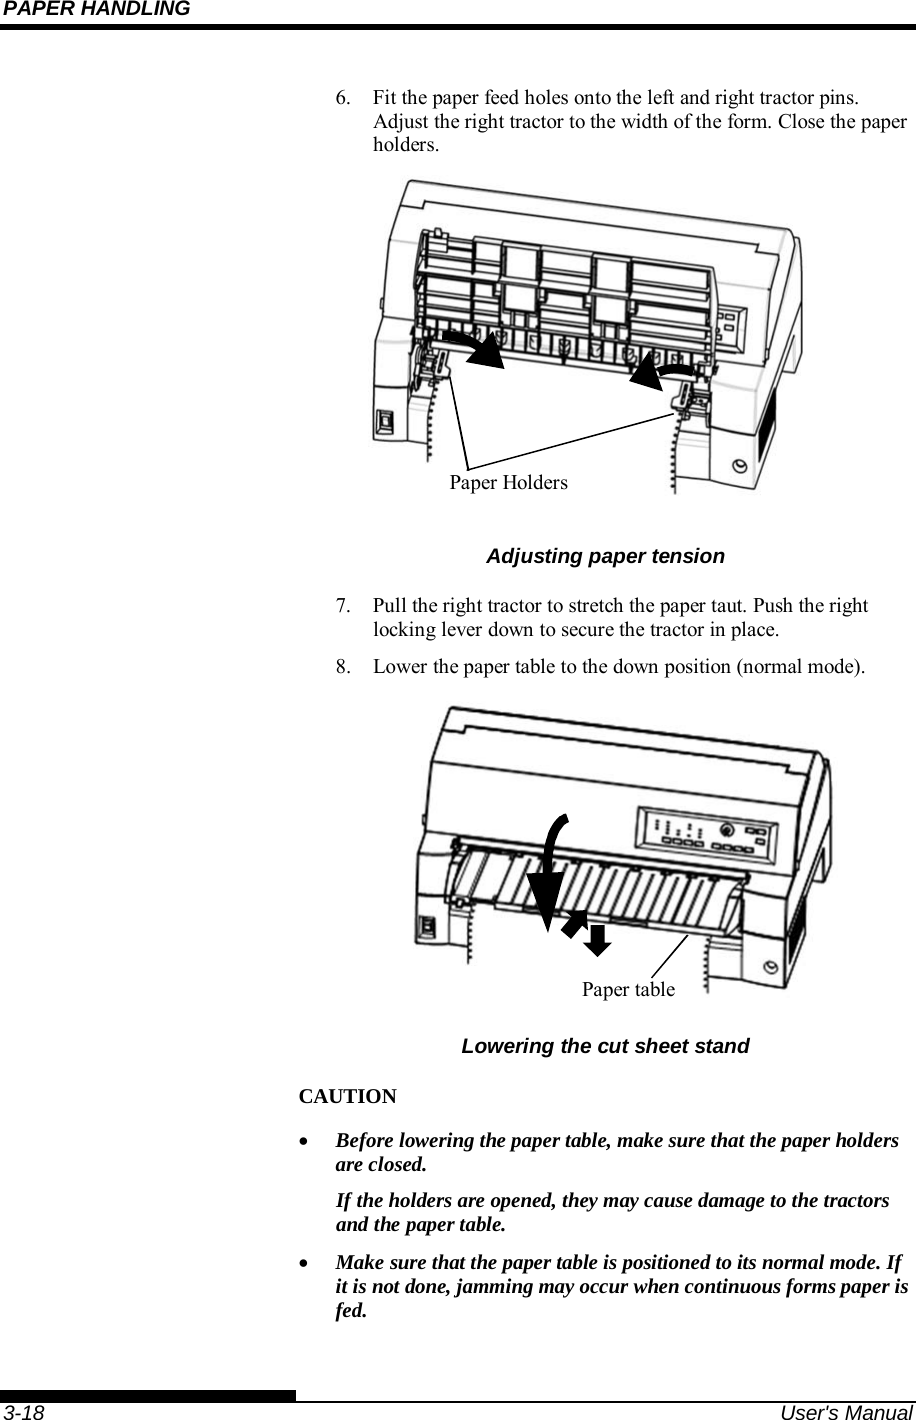 PAPER HANDLING    3-18  User&apos;s Manual 6.  Fit the paper feed holes onto the left and right tractor pins.  Adjust the right tractor to the width of the form. Close the paper holders.  Adjusting paper tension 7.  Pull the right tractor to stretch the paper taut. Push the right locking lever down to secure the tractor in place. 8.  Lower the paper table to the down position (normal mode).   Lowering the cut sheet stand CAUTION  Before lowering the paper table, make sure that the paper holders are closed. If the holders are opened, they may cause damage to the tractors and the paper table.  Make sure that the paper table is positioned to its normal mode. If it is not done, jamming may occur when continuous forms paper is fed.  Paper Holders Paper table